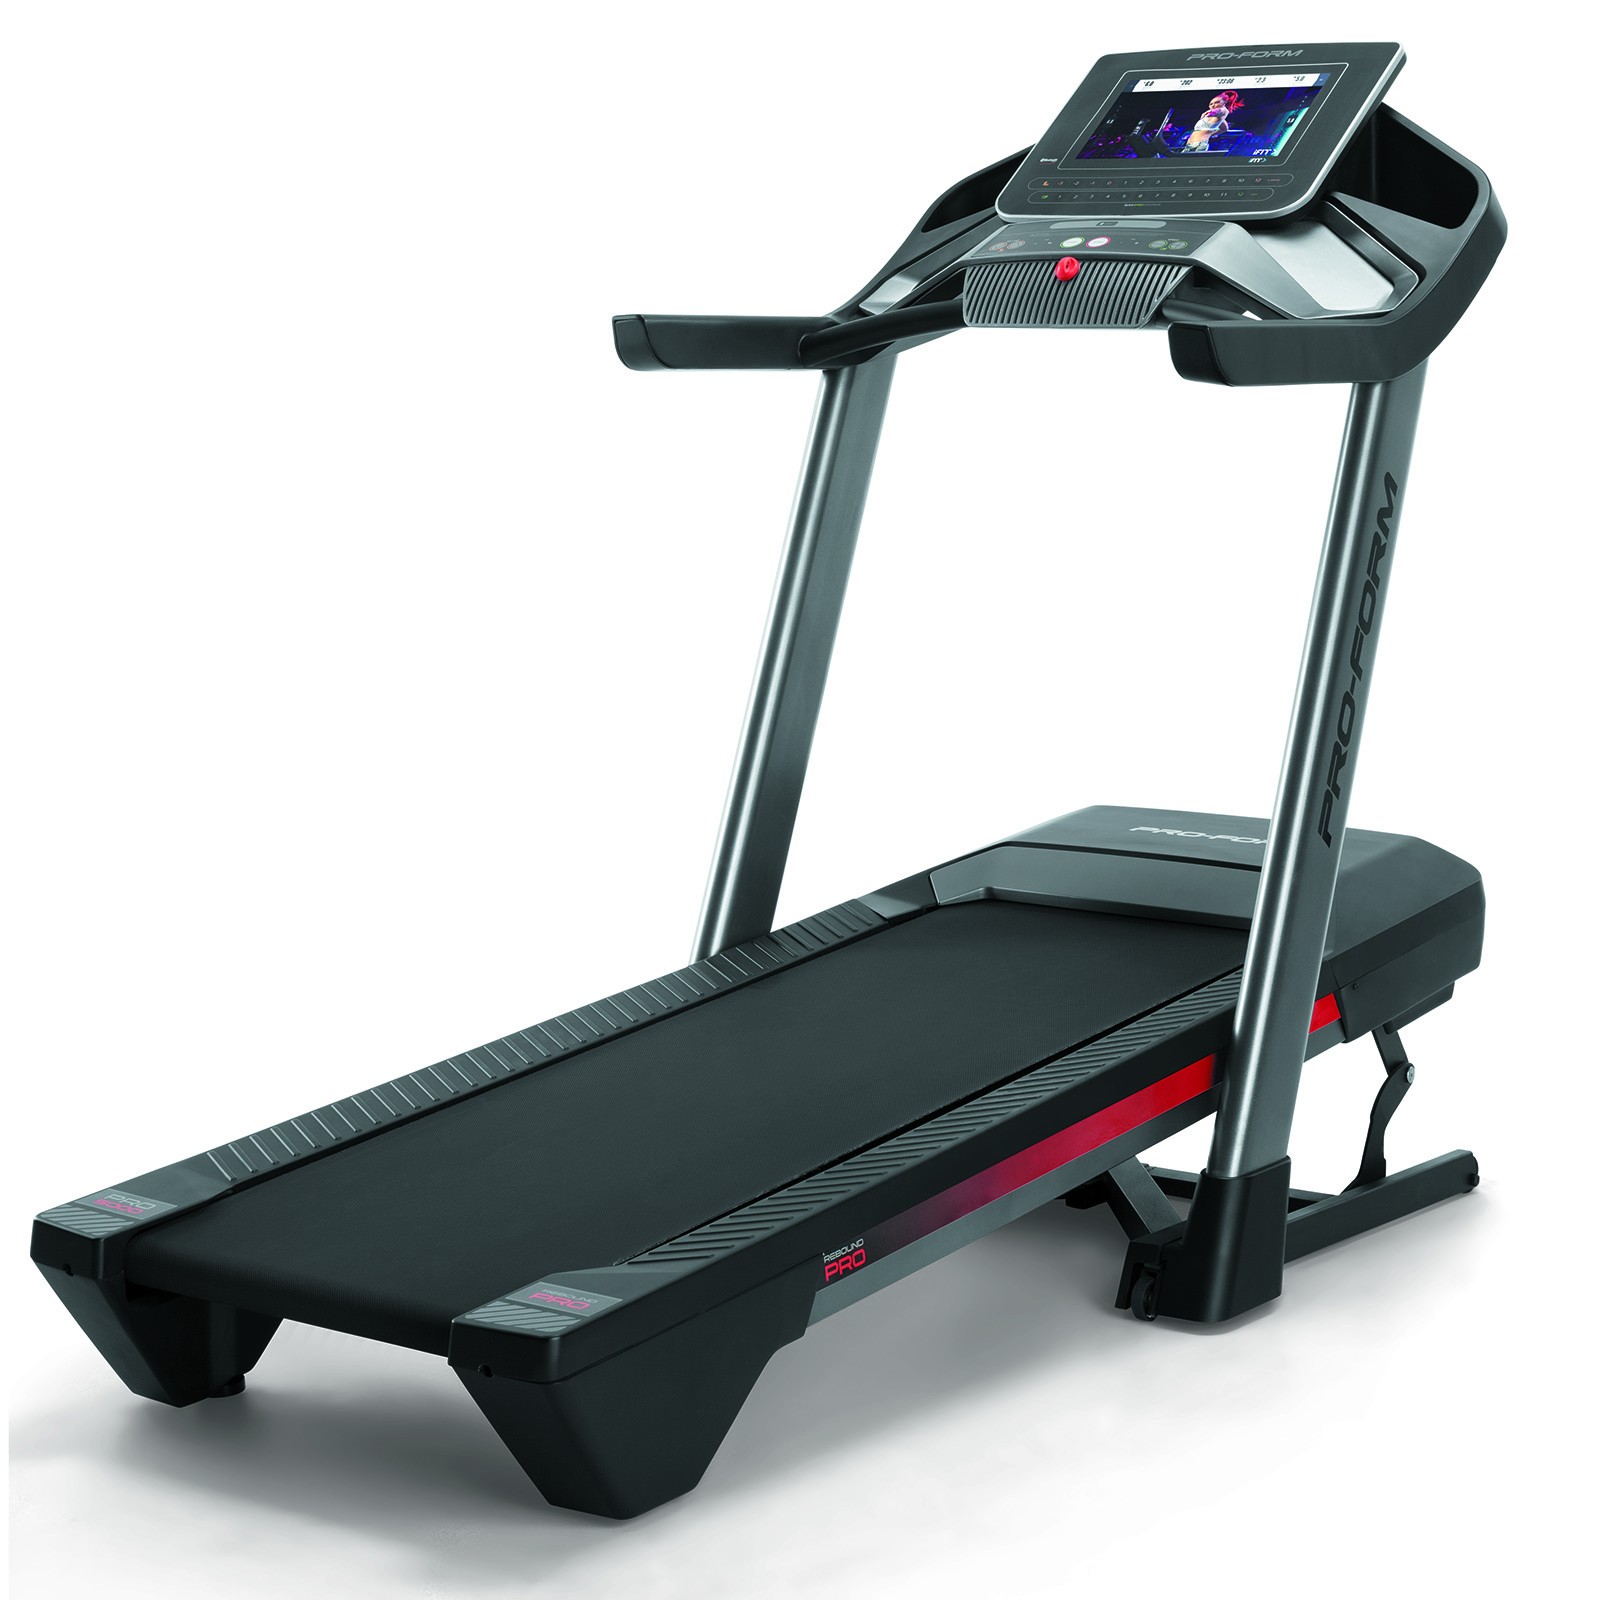 Portable Mechanical Treadmill Adjustable Incline Shock Home Indoor Sports Foldable Professional Treadmill 